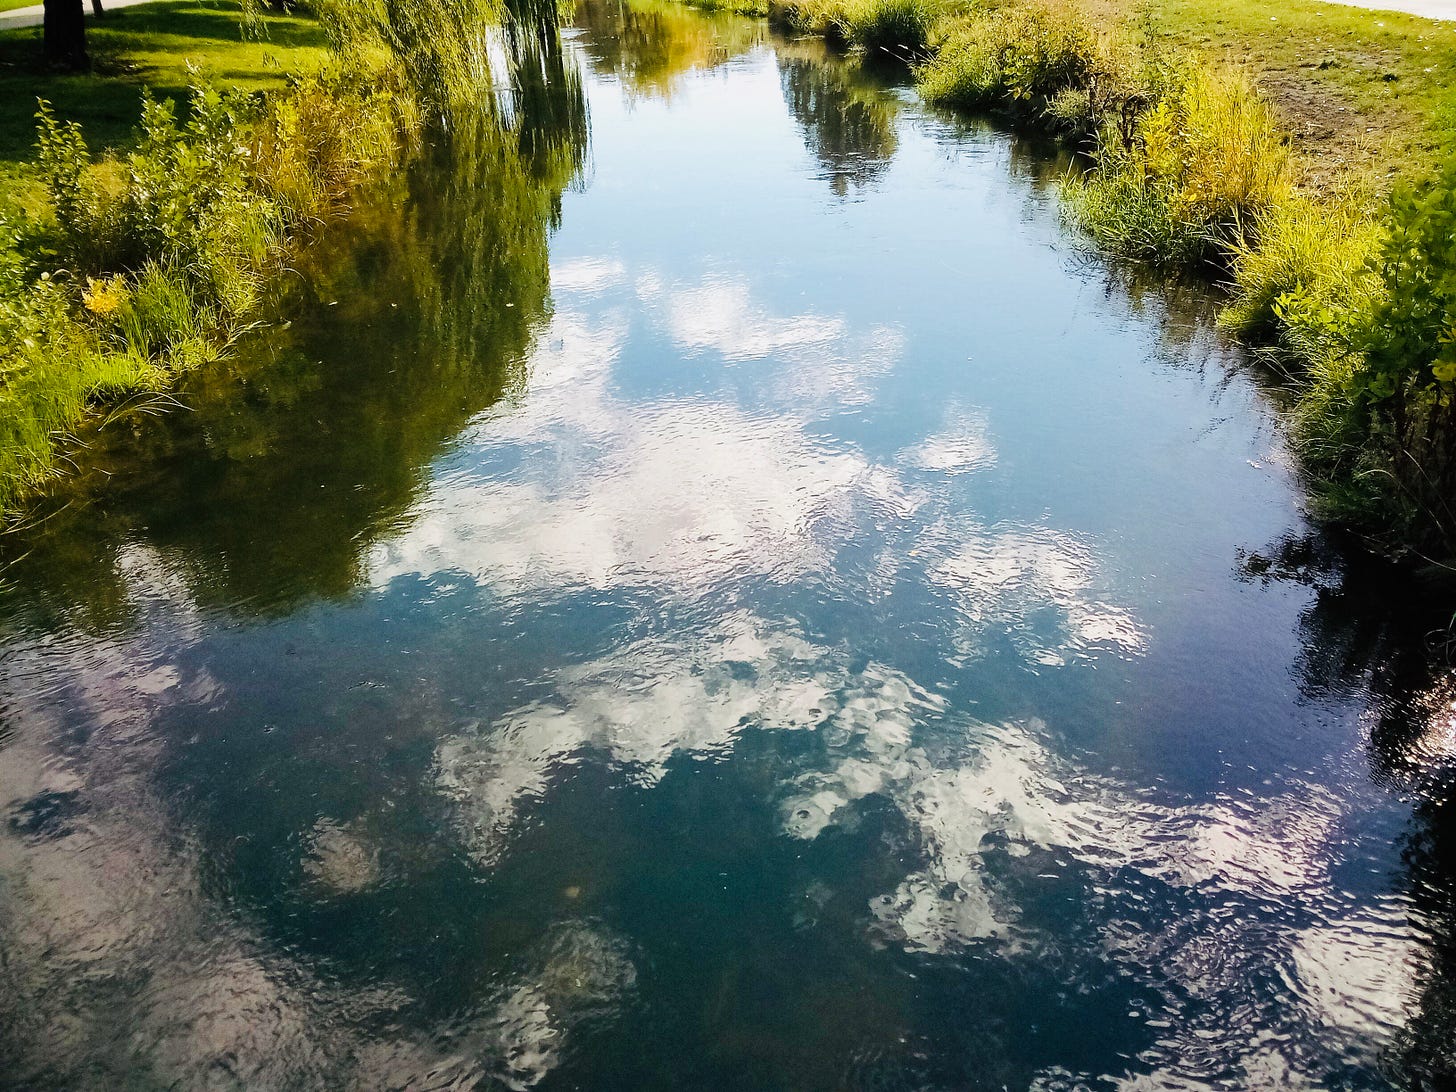 Clouds reflected in a stream